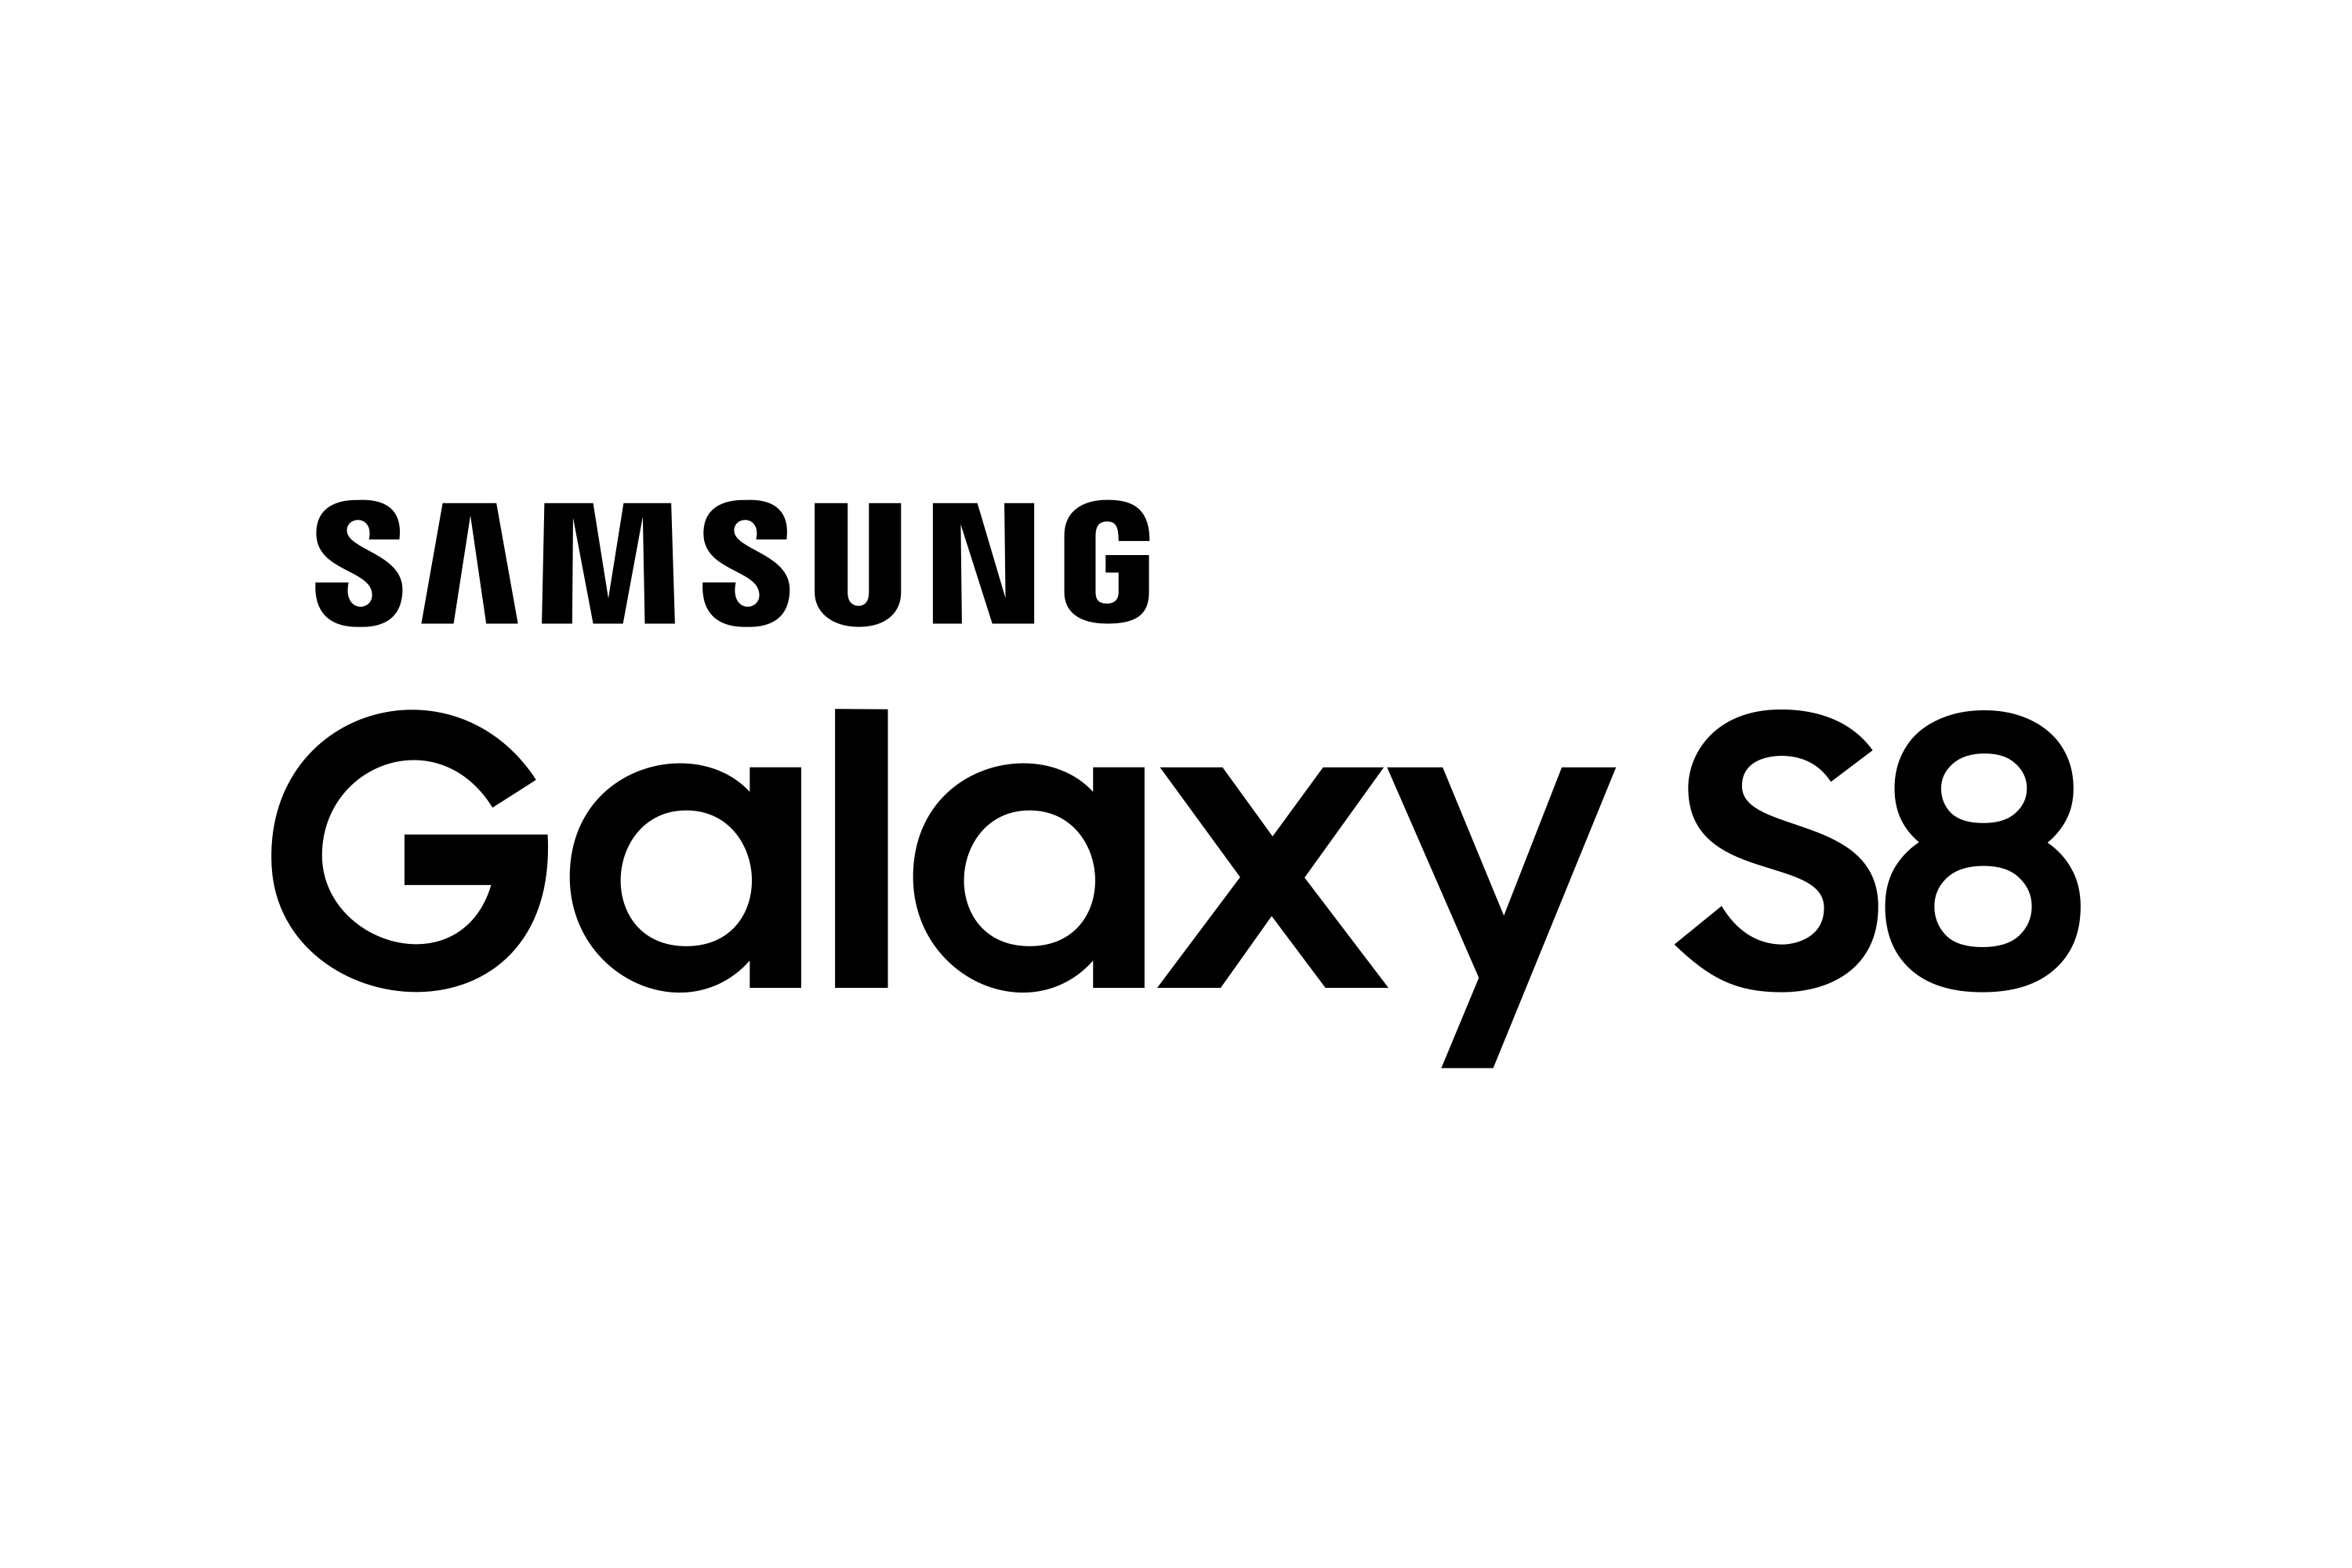 Download Samsung Galaxy S8 Logo in SVG Vector or PNG File Format ...